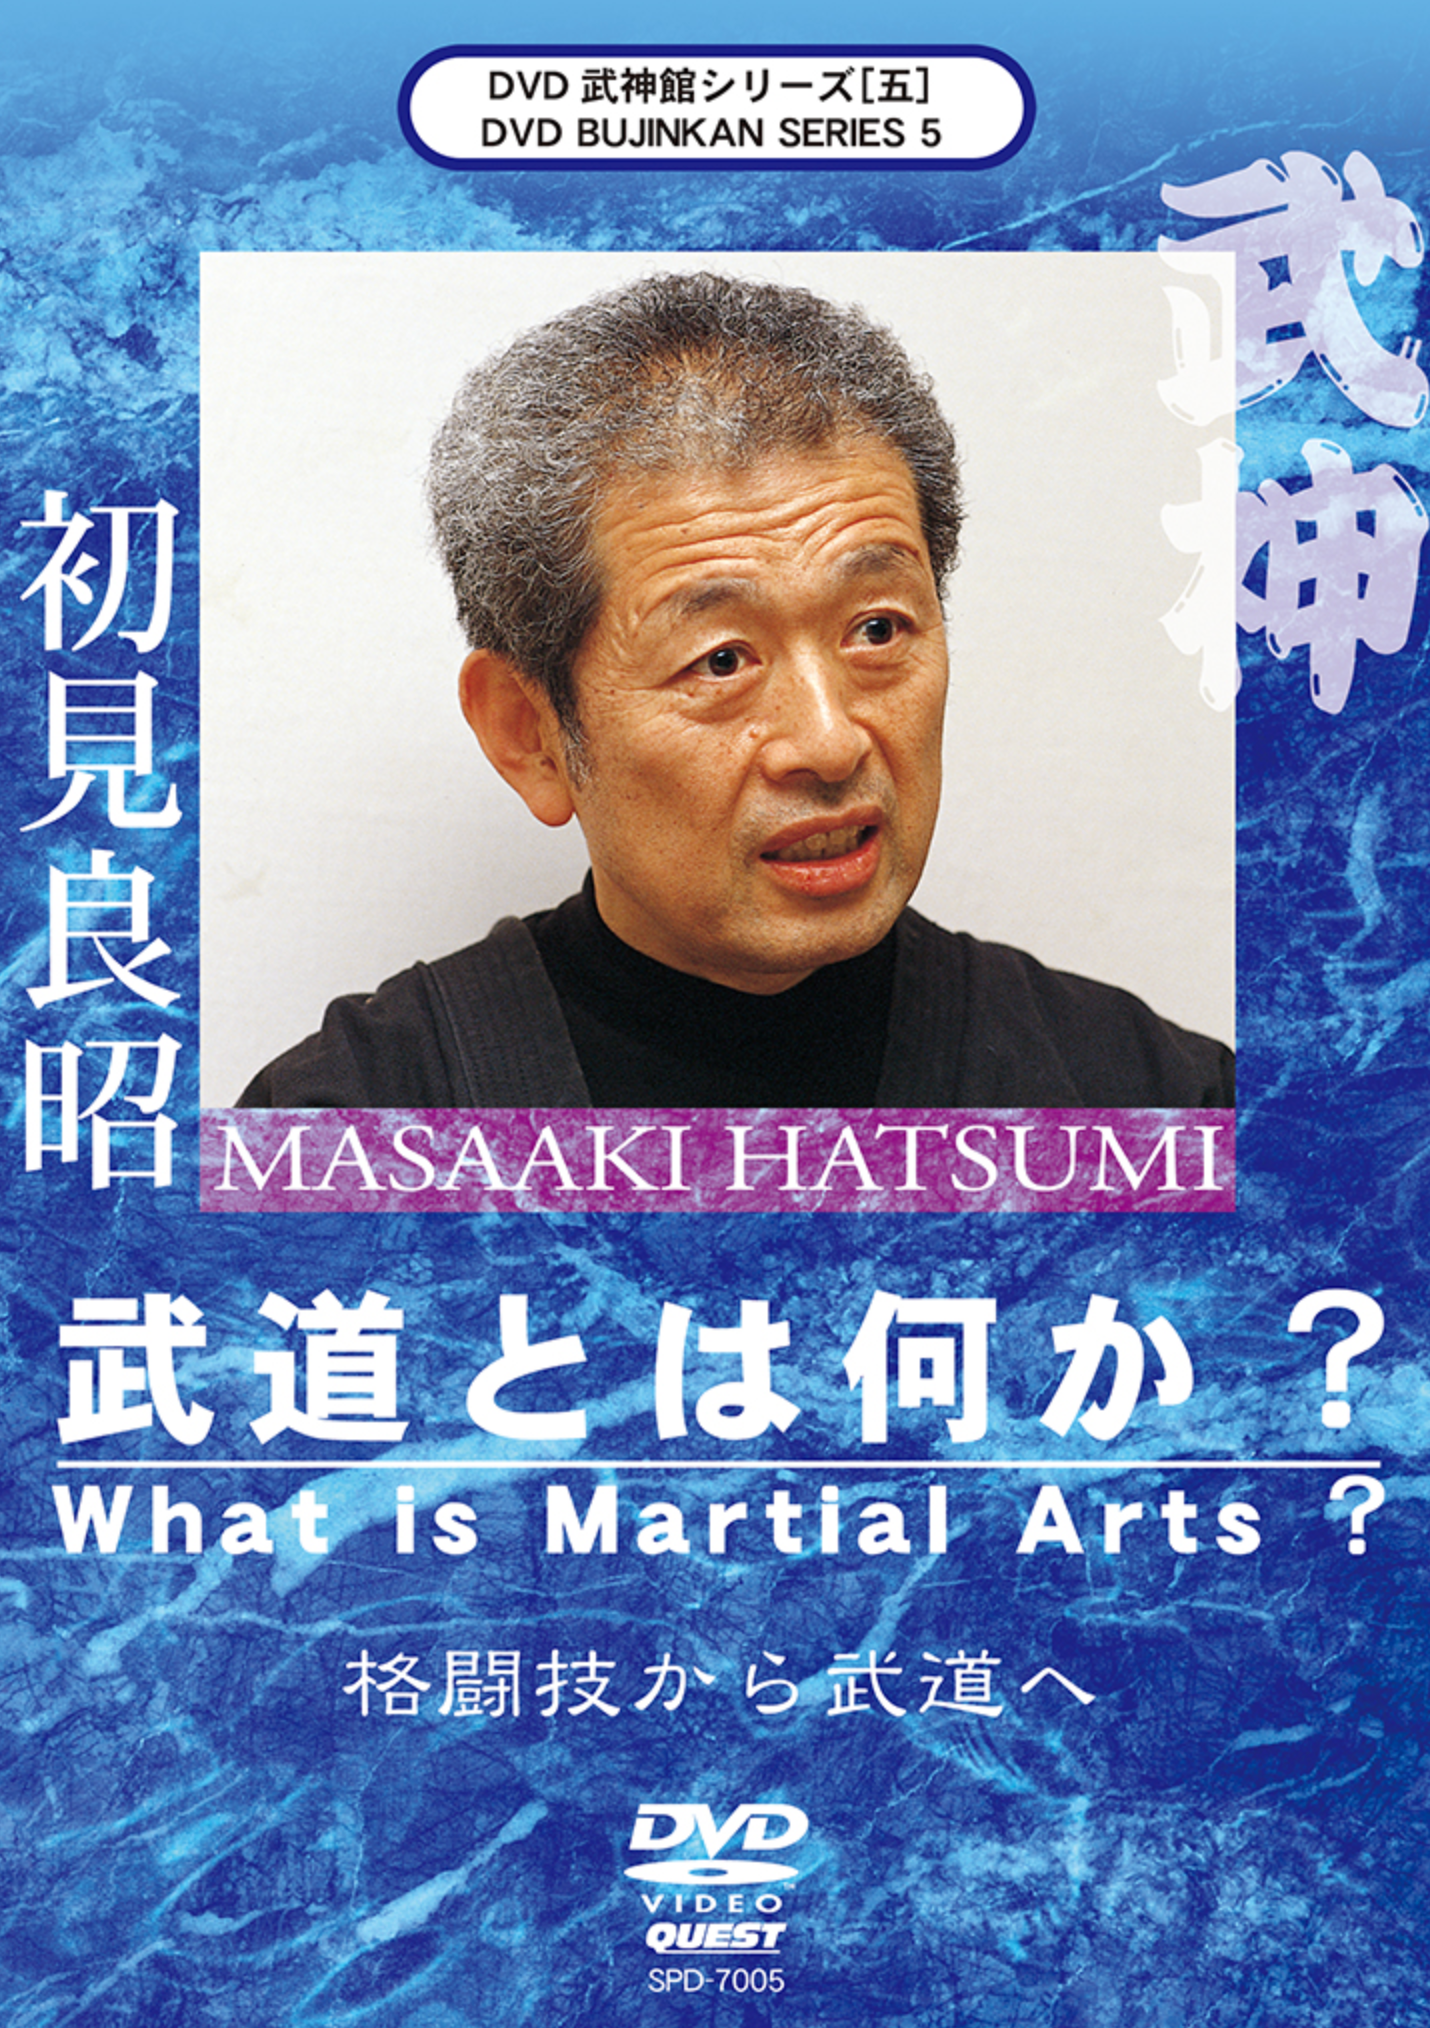 Bujinkan DVD Series 5: What is Martial Arts? with Masaaki Hatsumi - Budovideos Inc